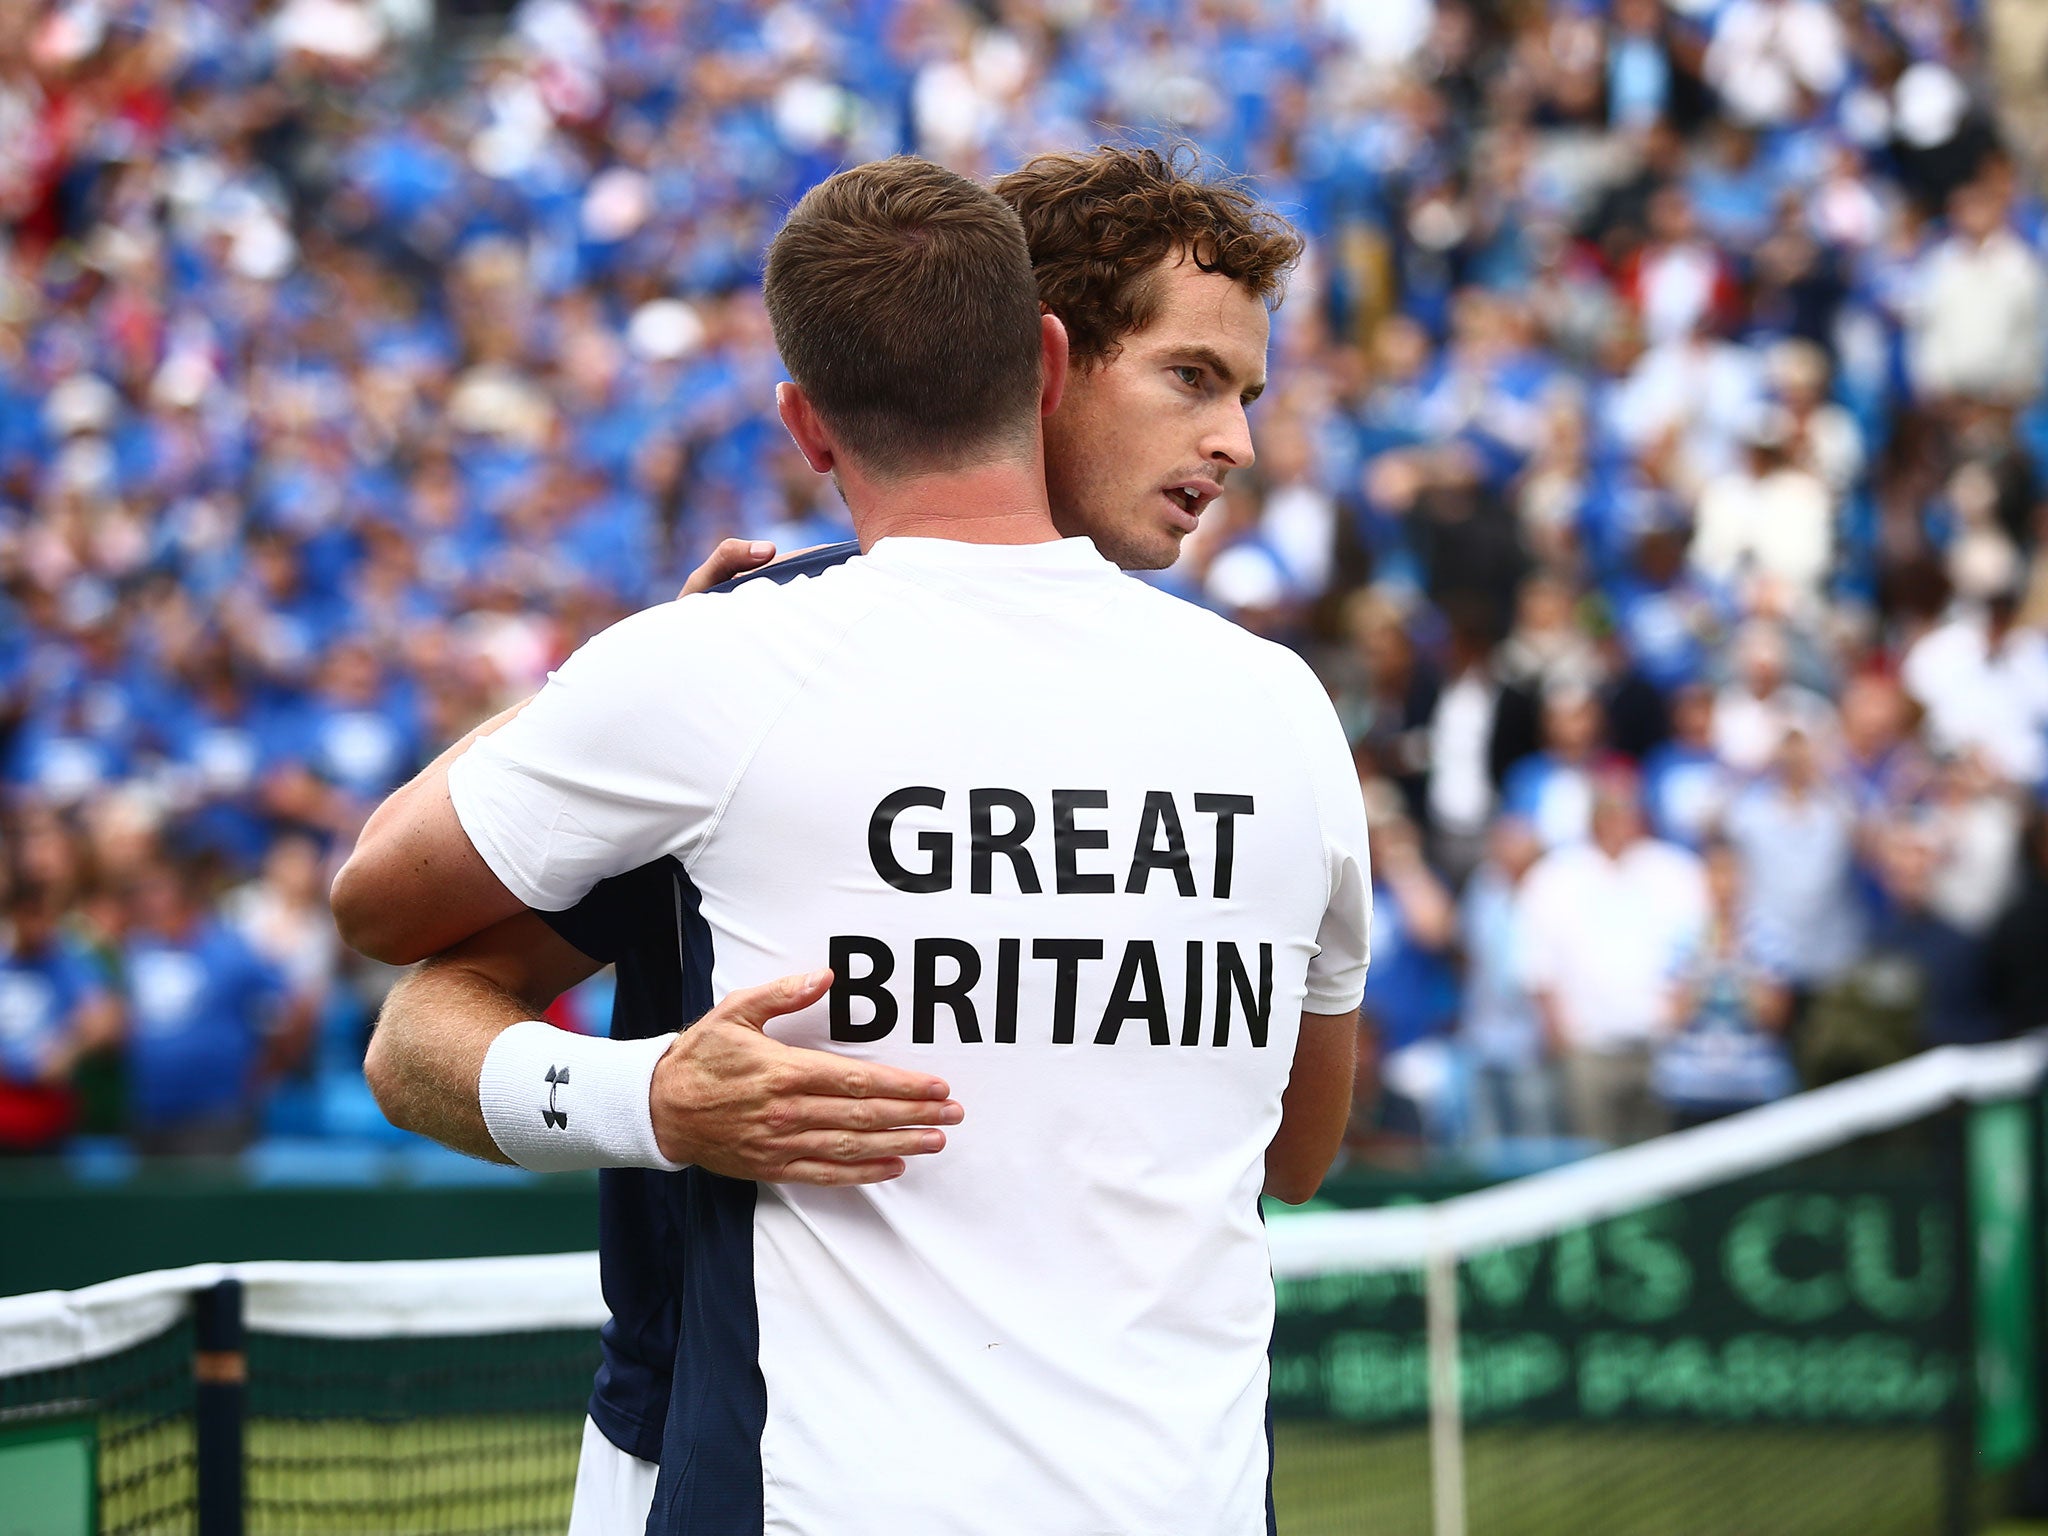 Andy Murray celebrates with captain Leon Smith after winning his match against Jo-Wilfried Tsonga of France during Day One of the World Group Quarter Final Davis Cup